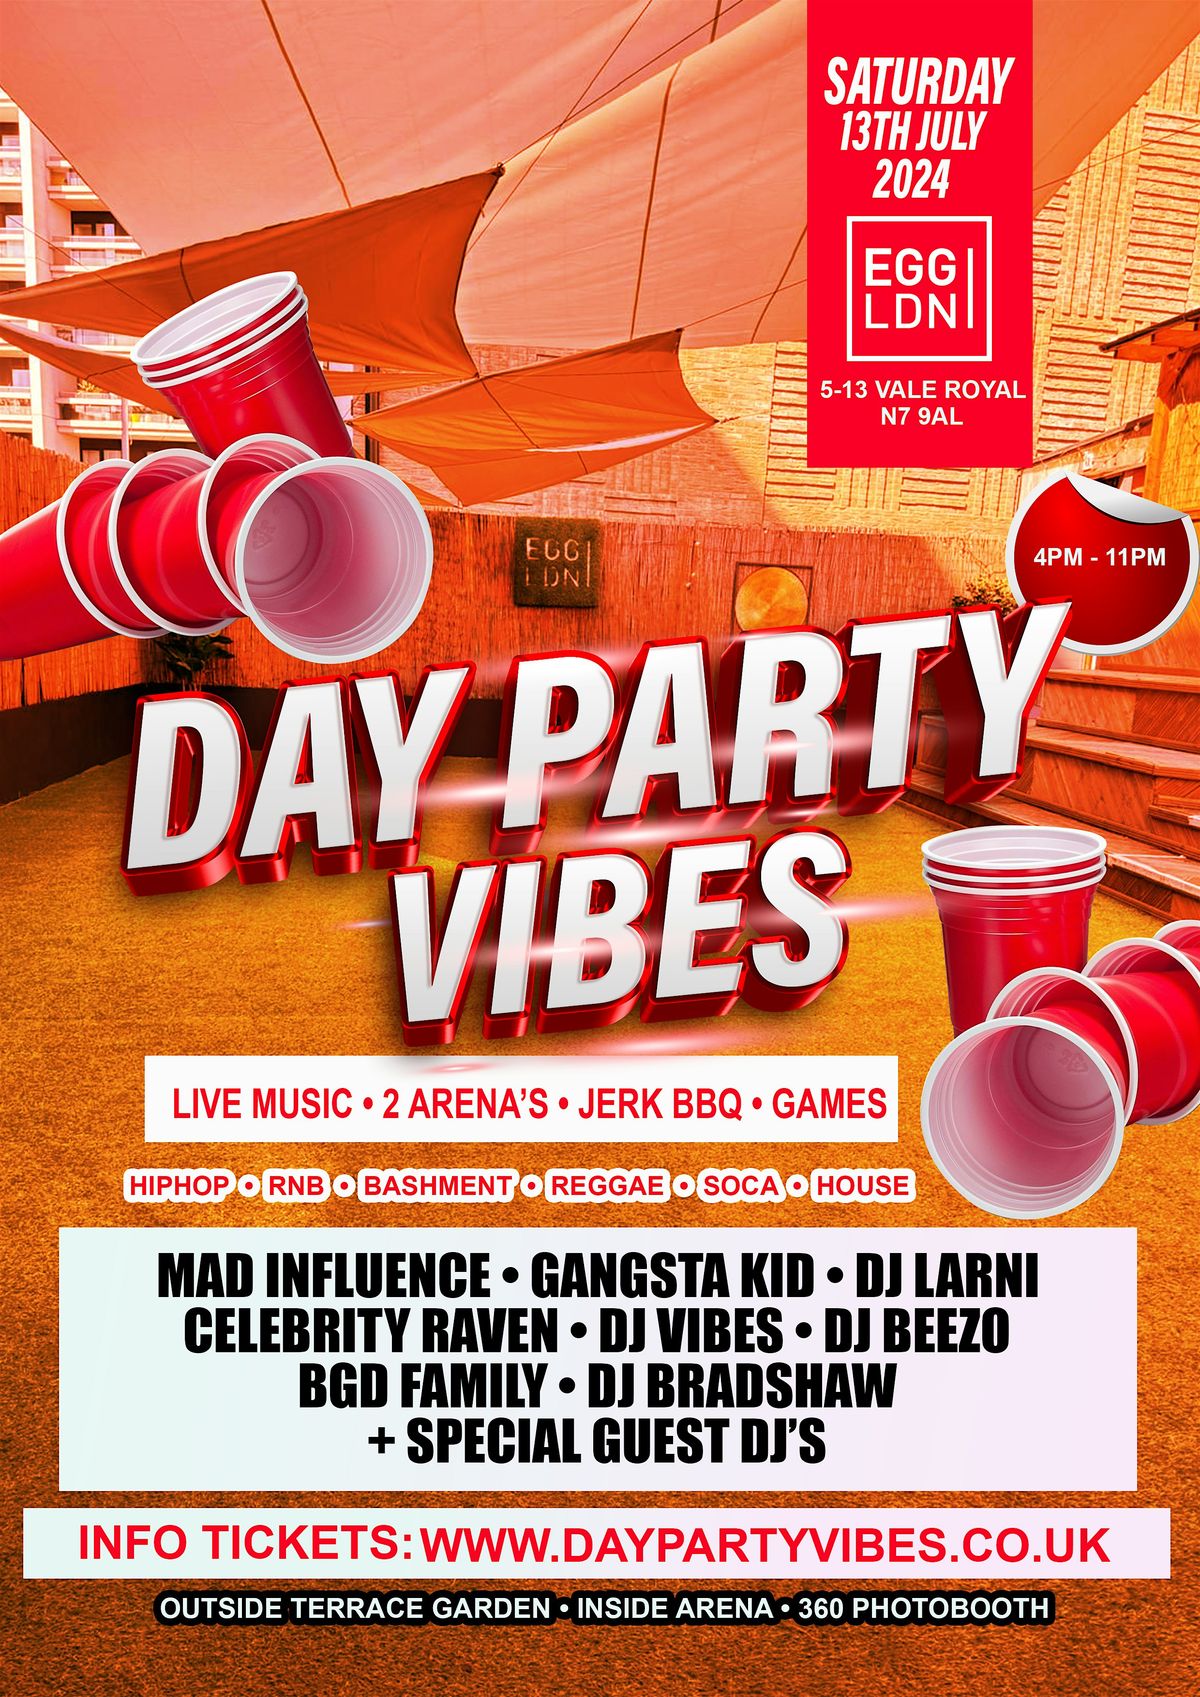 DAY PARTY VIBES